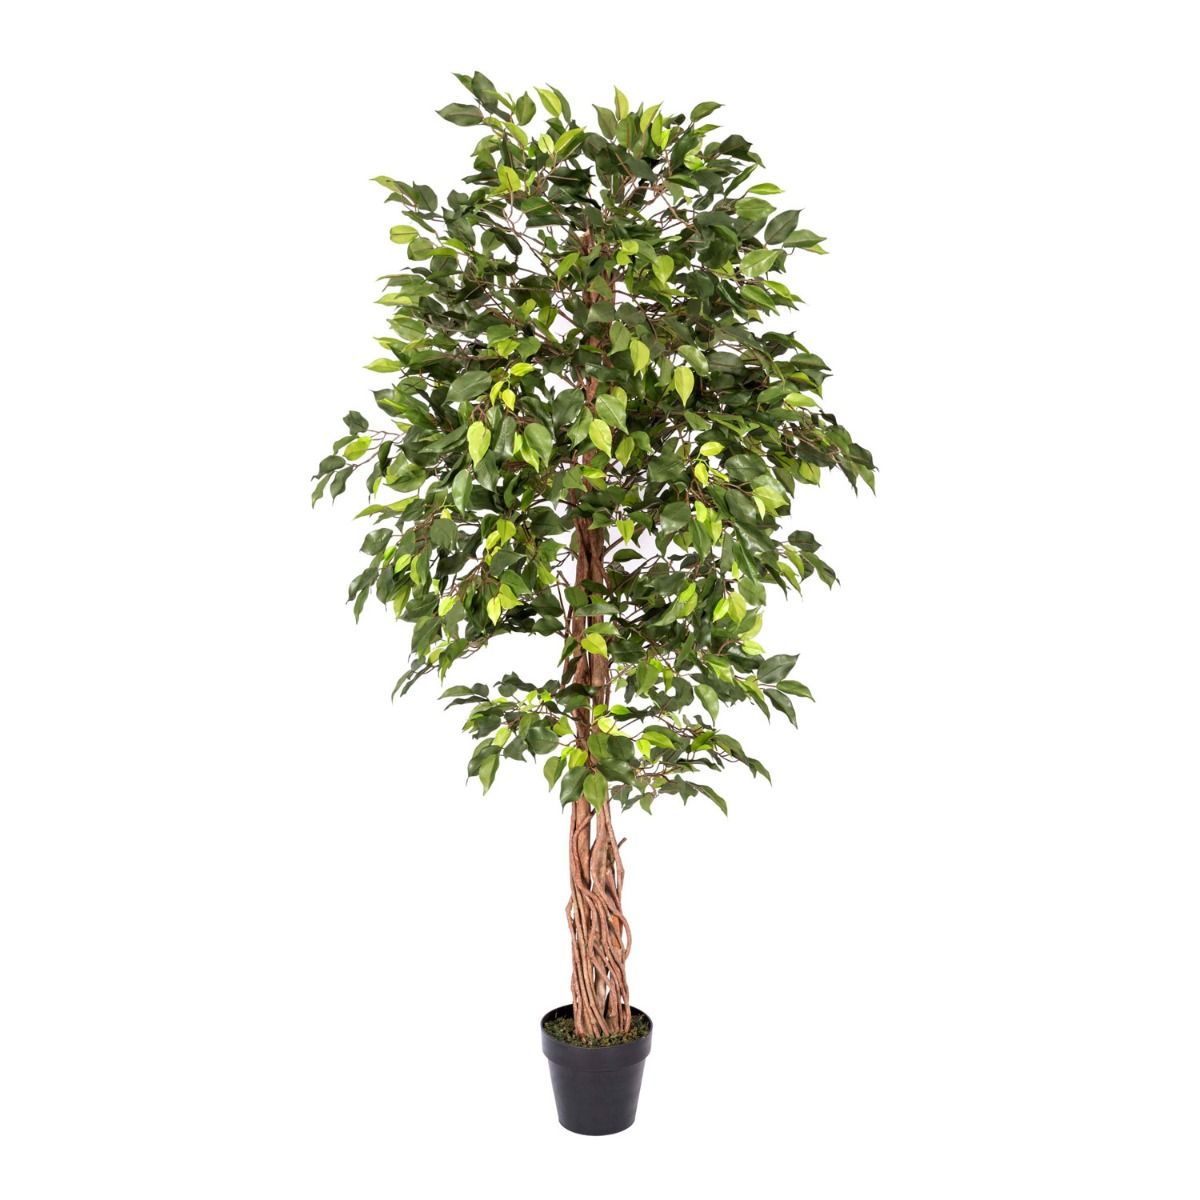 Homescapes Cerise Pink 5 Feet Blossom Tree Real Wood Stems and Lifelike Leaves Replica Artificial Plant